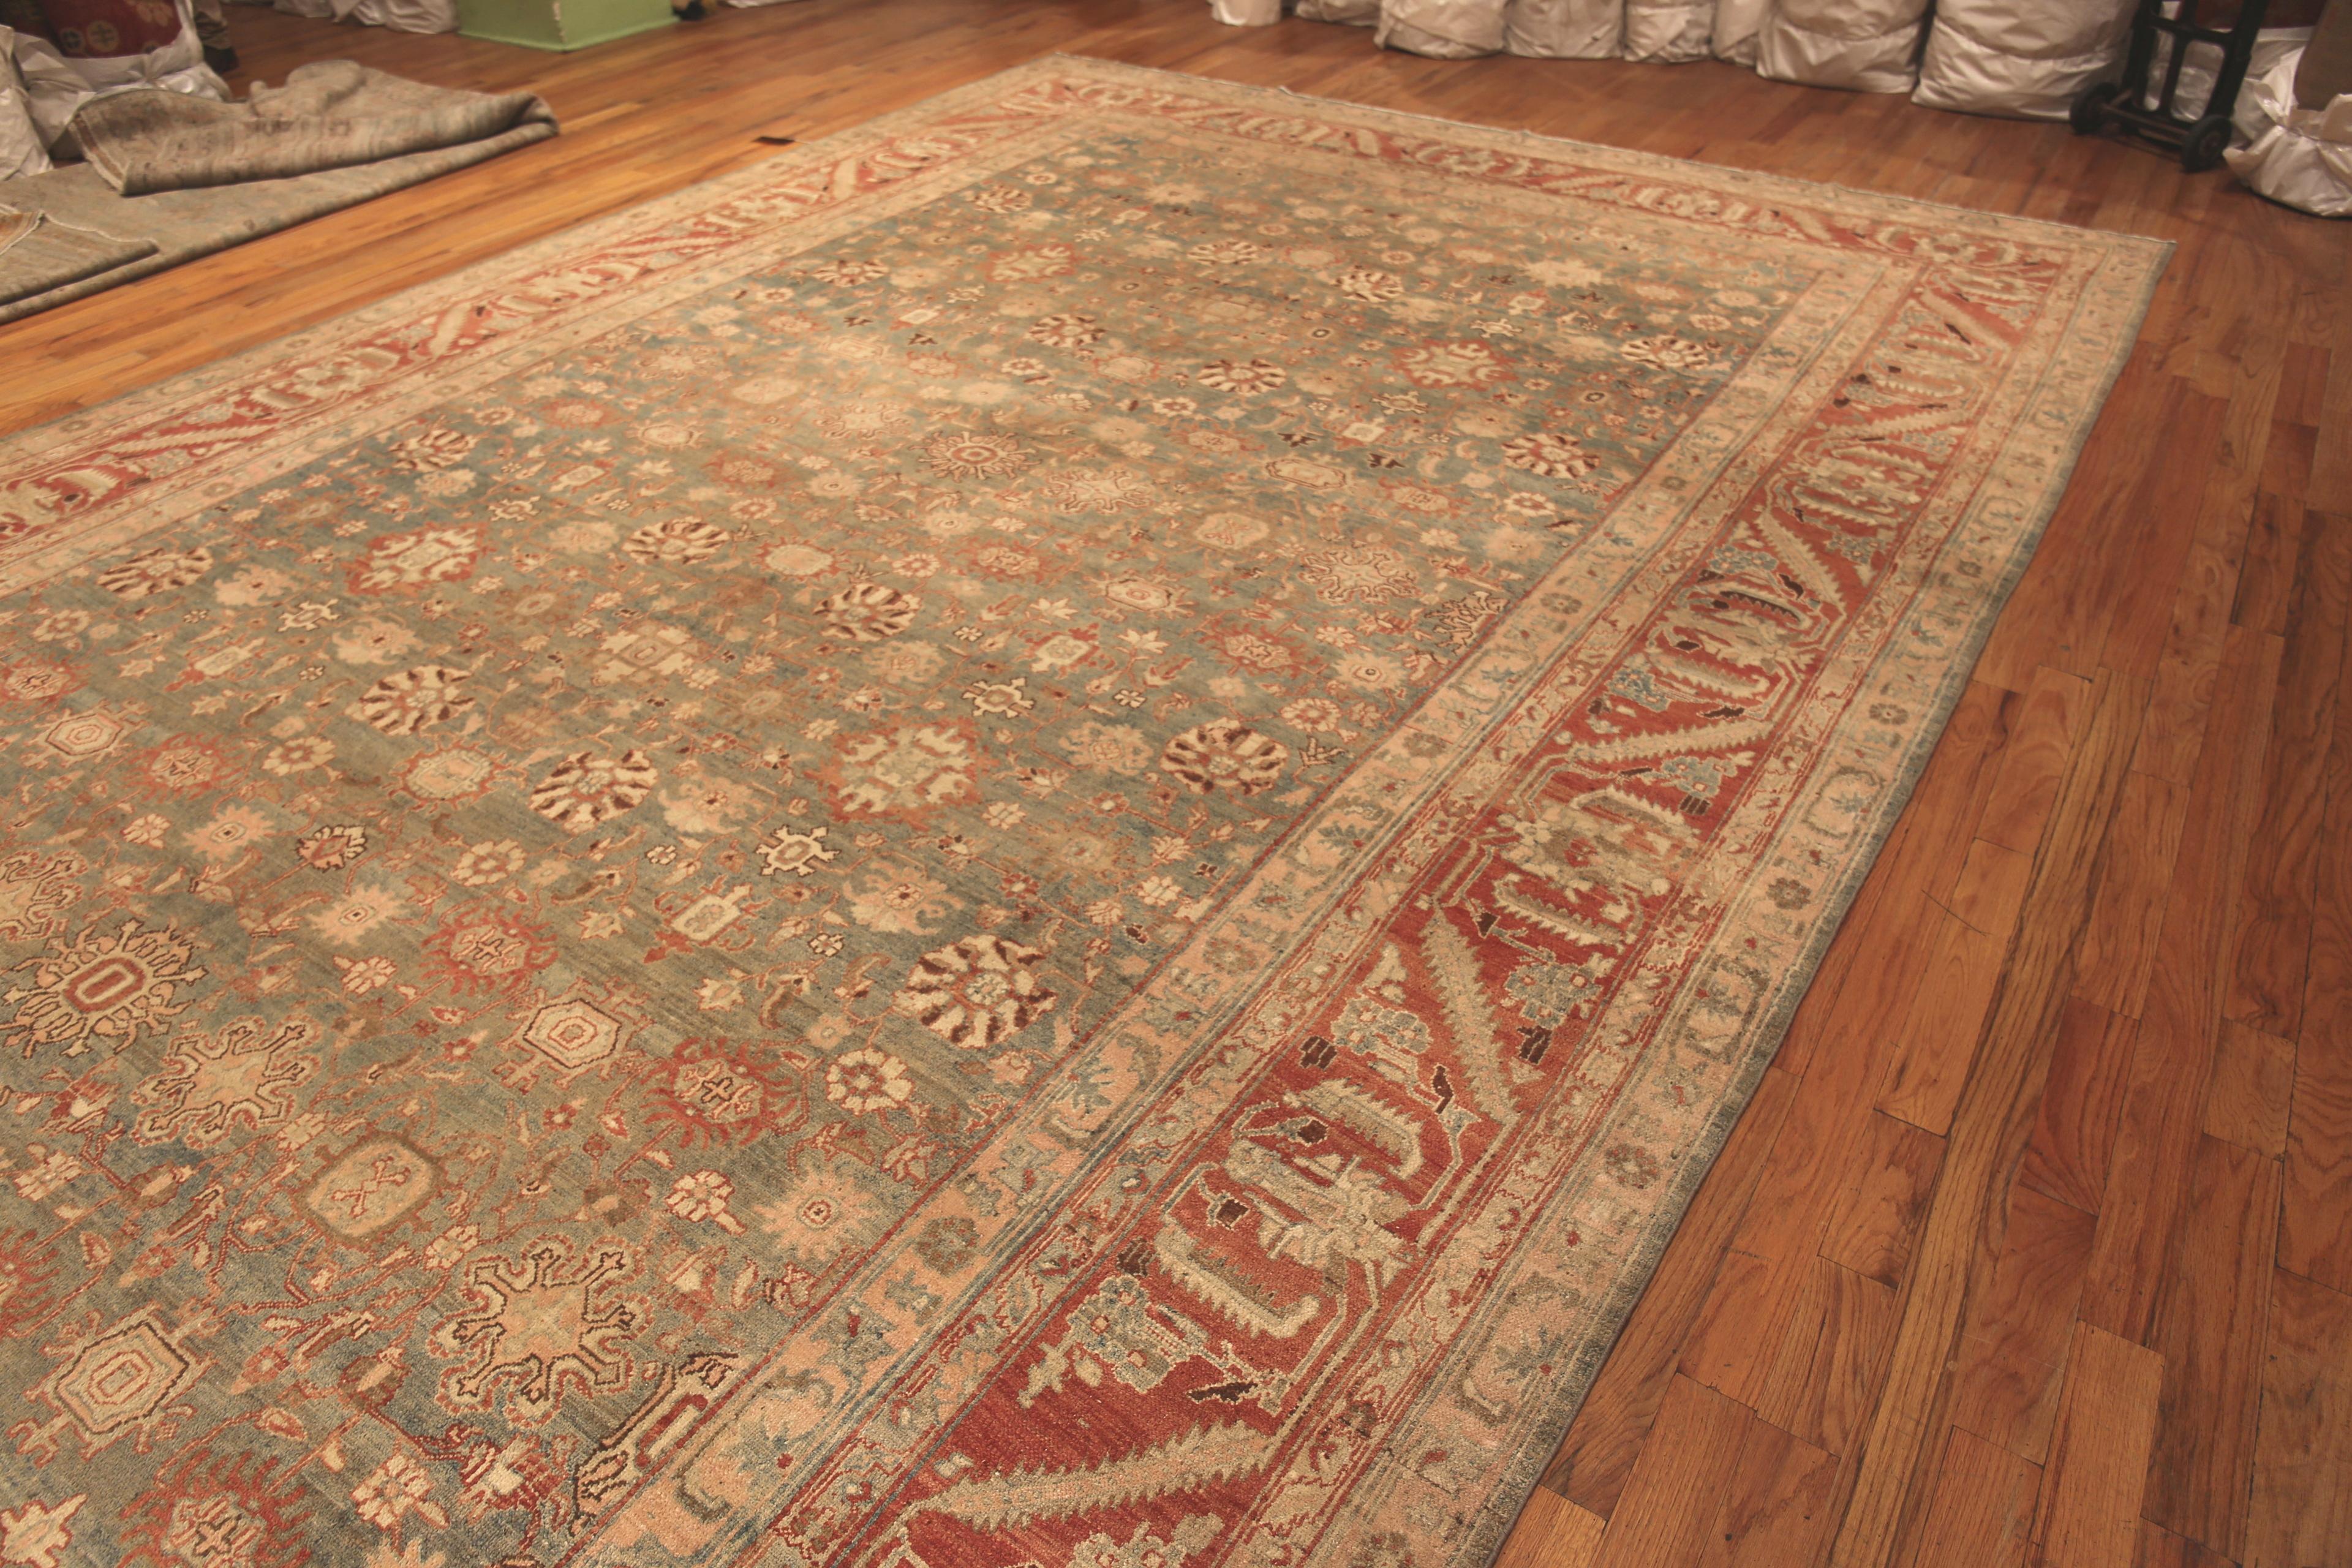 Beautifully Decorative Oversized Rustic Antique Tribal Persian Malayer Rug, Country of Origin: Persia, Circa date: 1920. Size: 11 ft 10 in x 21 ft 9 in (3.61 m x 6.63 m)